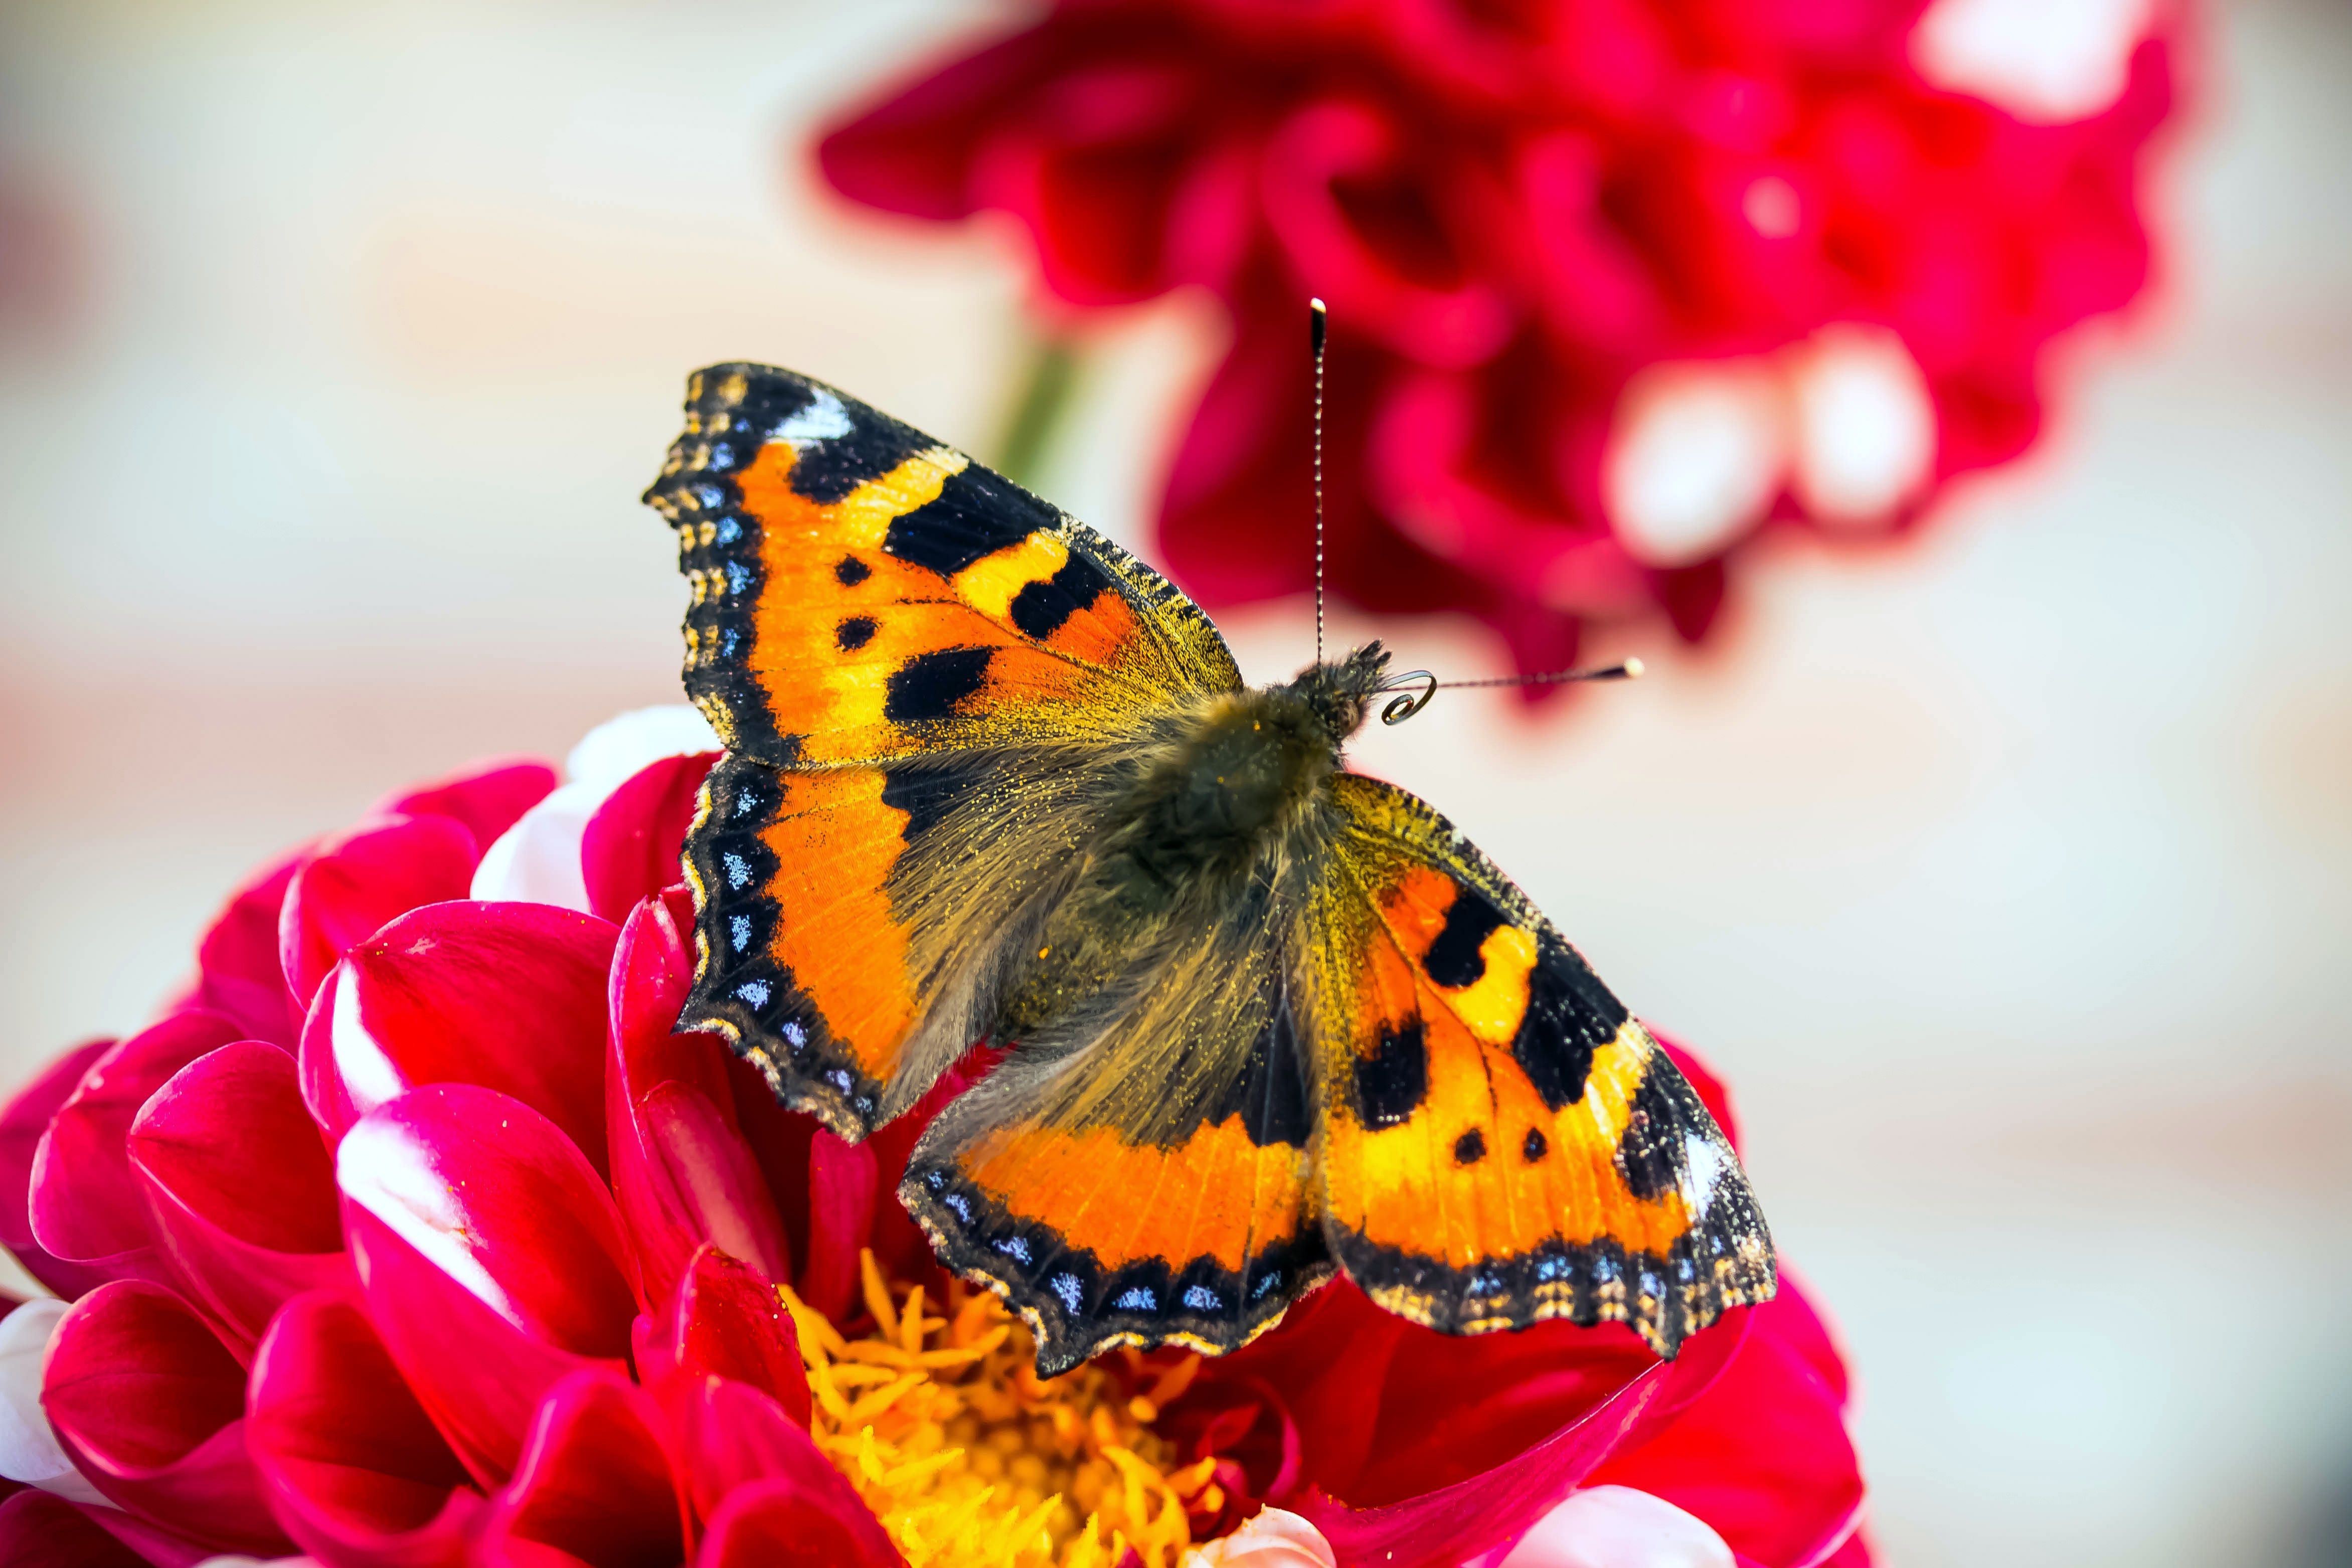 Butterfly Closeup, Animal, Blooming, Butterfly, Closeup, HQ Photo